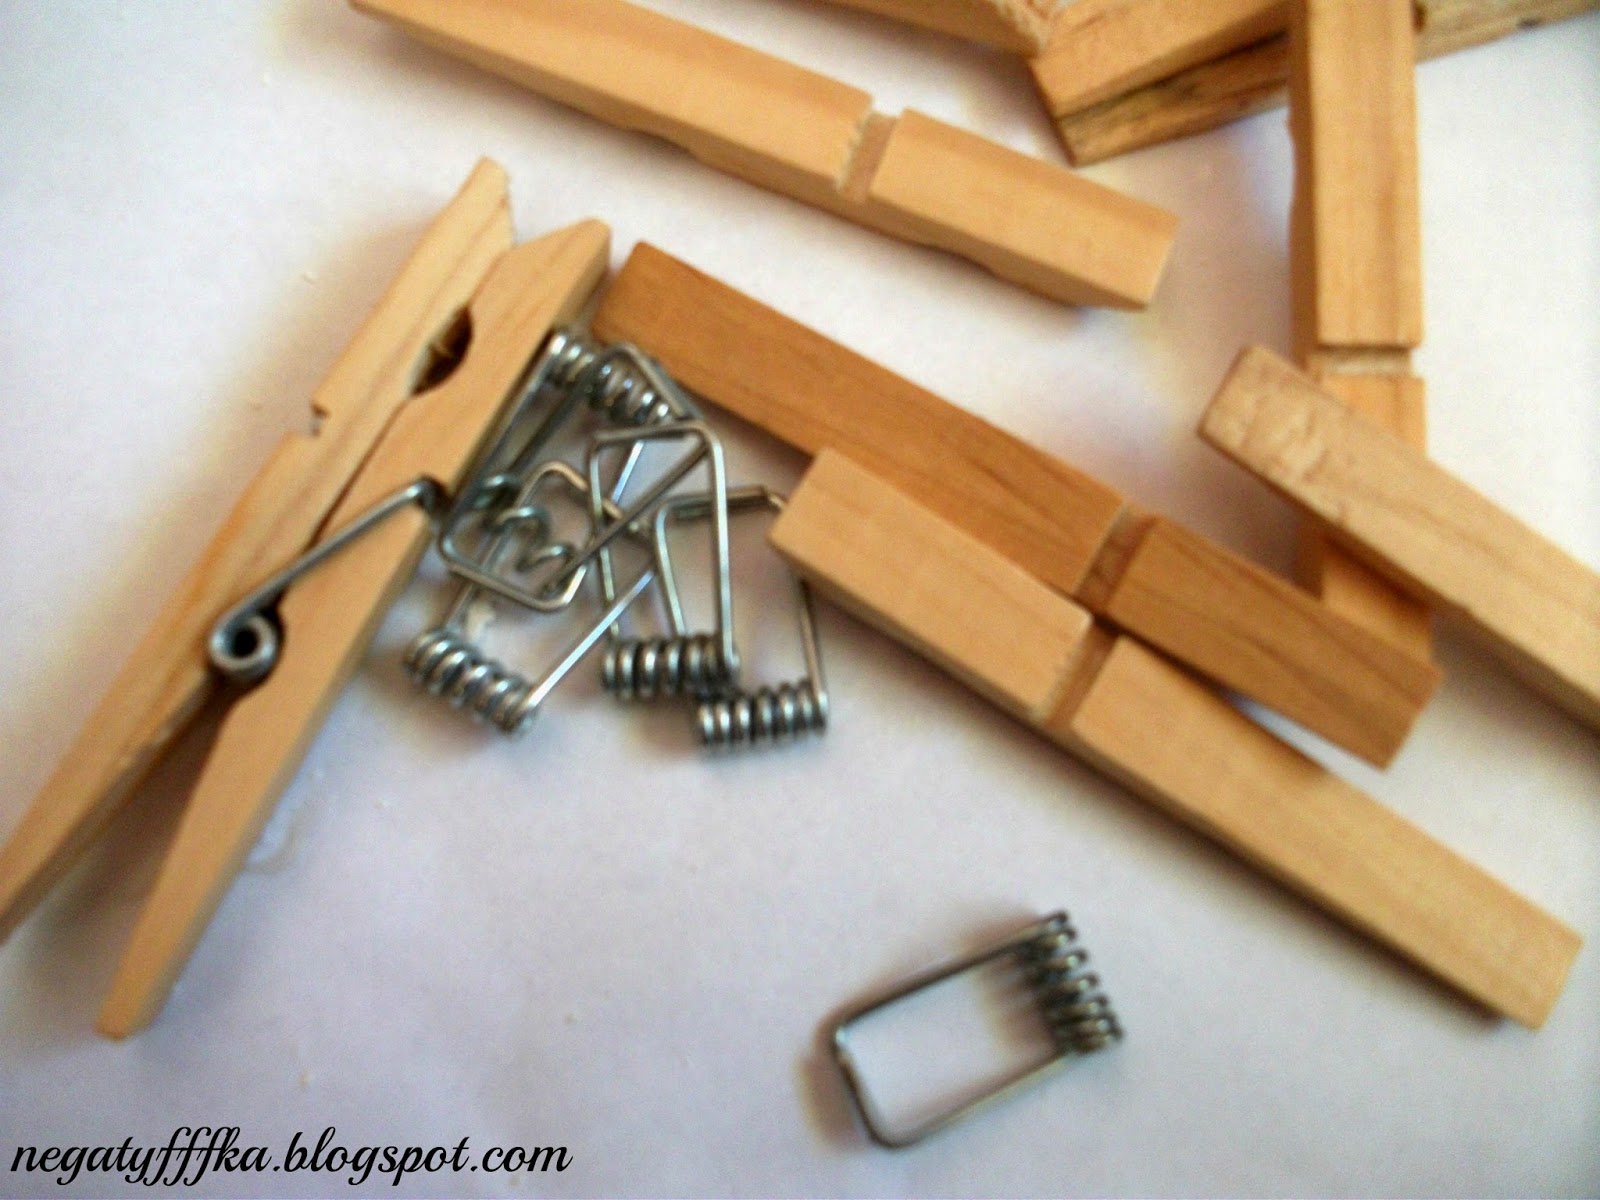 How to Make a Unique Napkin Holder from Clothespins